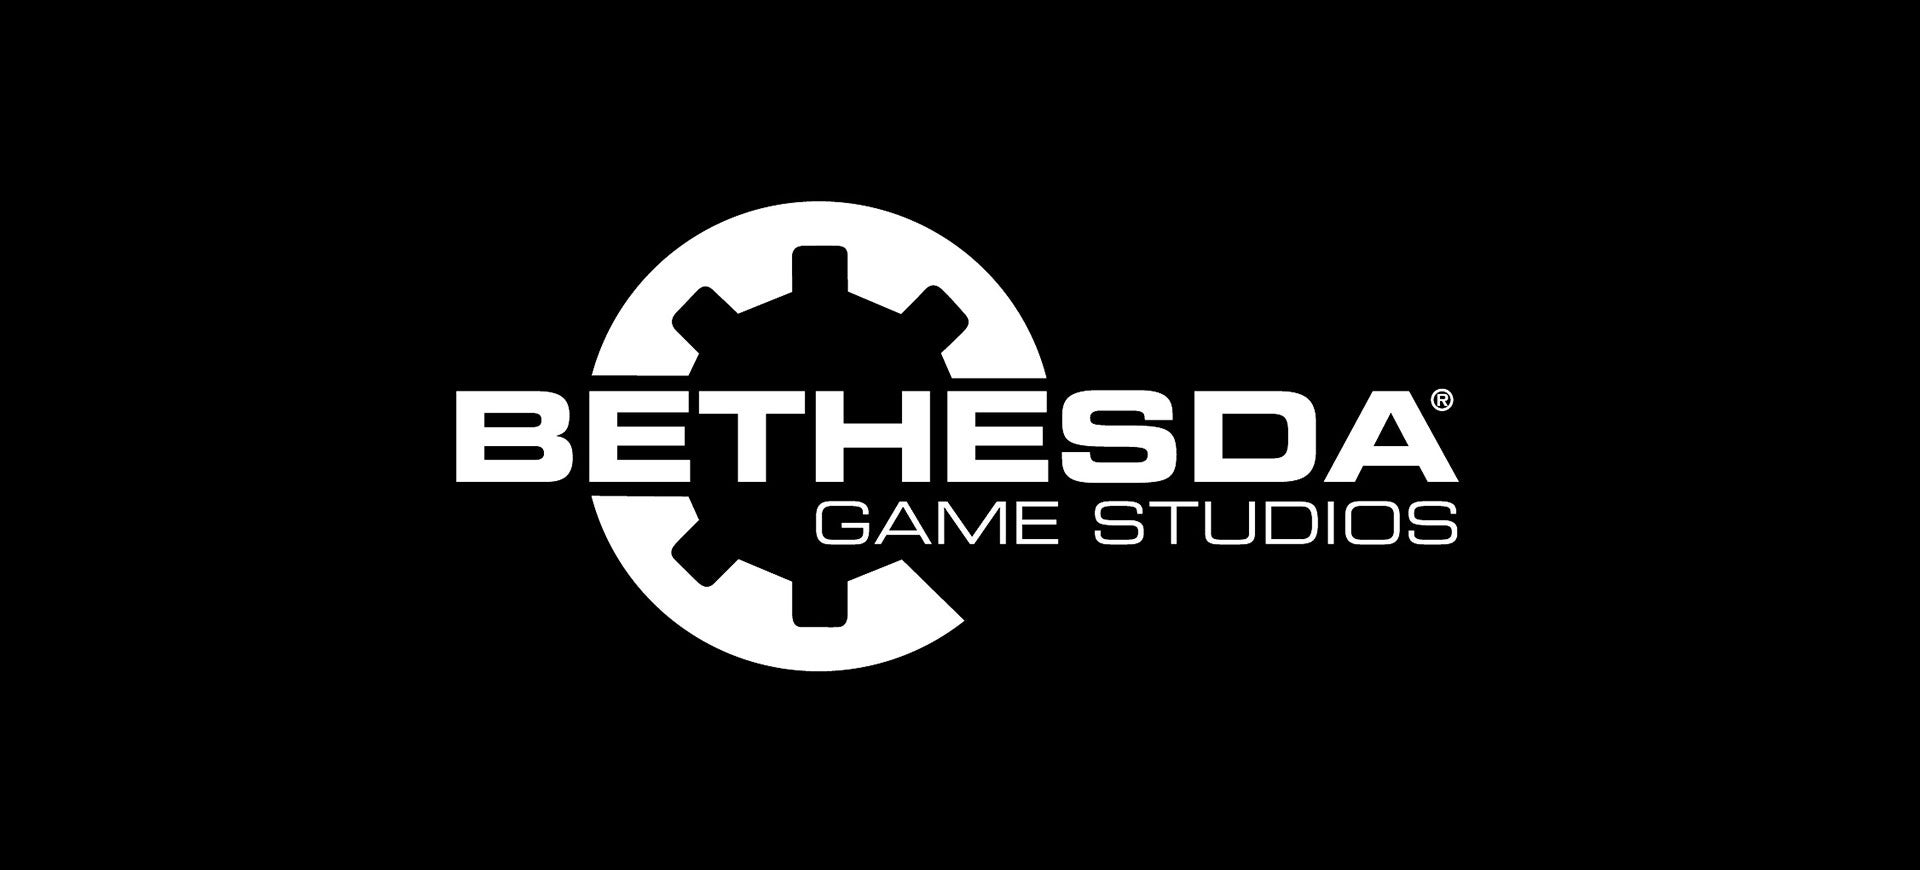 Image for Microsoft confirms some future Bethesda games will be Xbox, PC exclusive